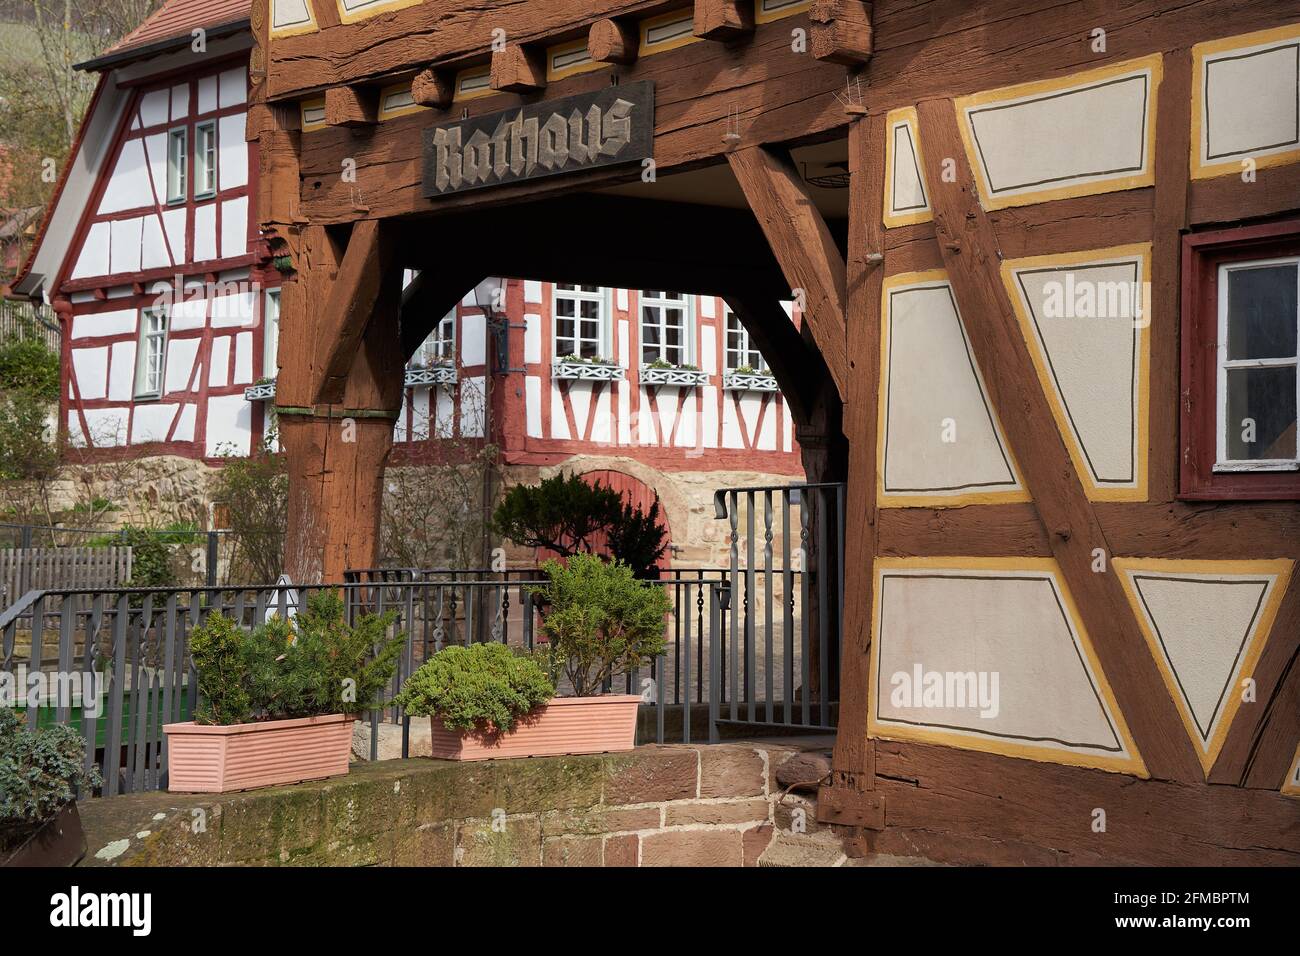 Wooden panel on a half-timbered house saying: Town hall (german: Rathaus). Historical town in Germany. Stock Photo